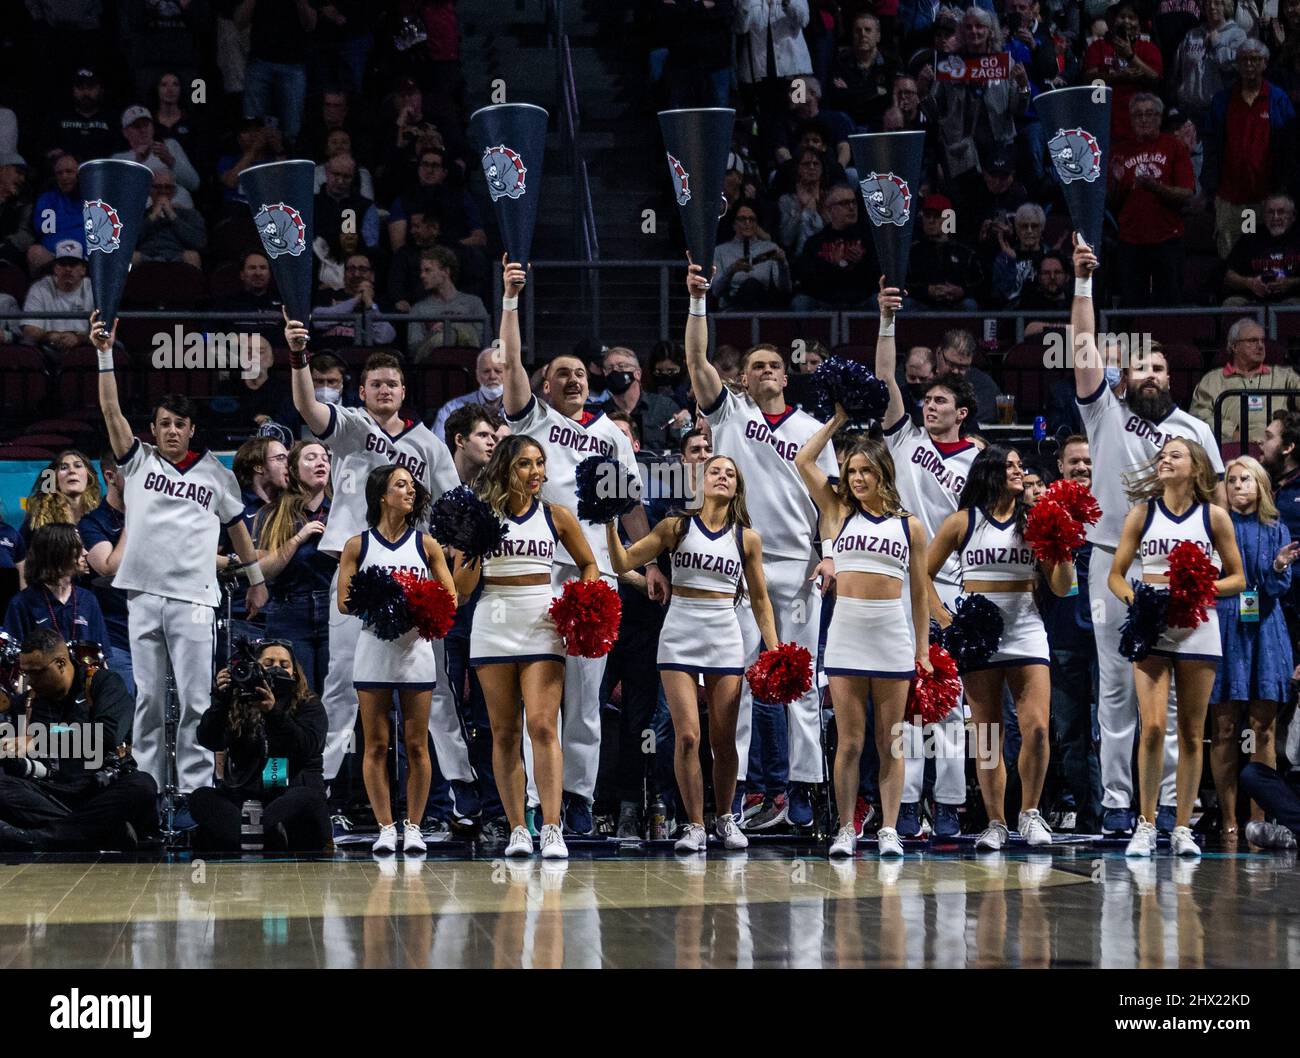 March 08 2022 Las Vegas, NV, U.S.A. Gonzaga cheerleaders during the NCAA West Coast Conference Men's Basketball Tournament Championship game between Gonzaga Bulldogs and the Saint Mary's Gaels at Orleans Arena Las Vegas, NV. Thurman James/CSM Stock Photo